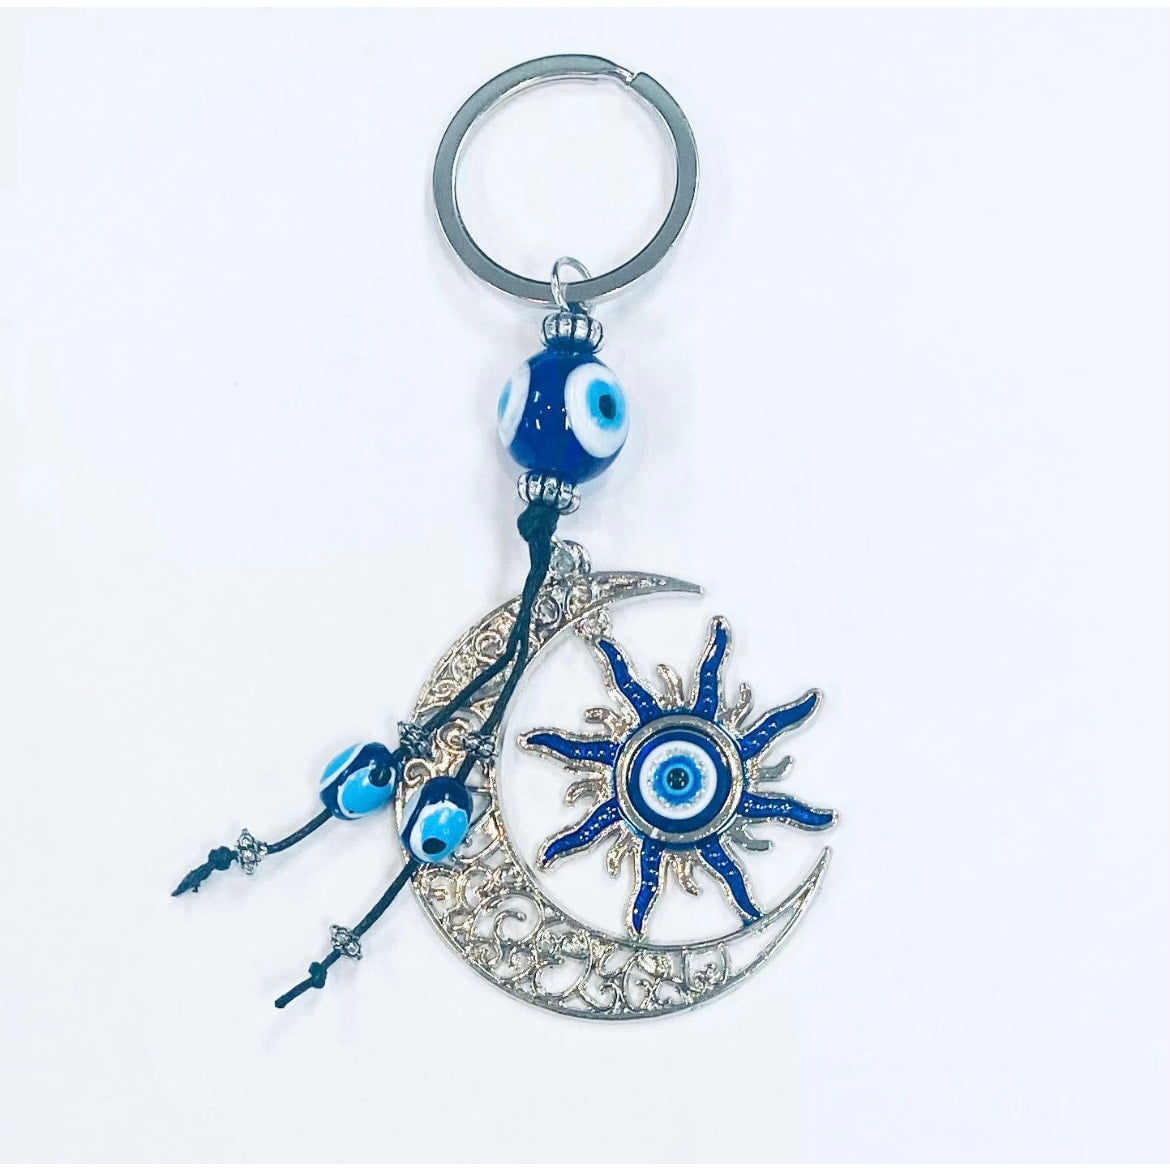 Evil Eye Keychain #Q198 - Protective and Stylish Accessory for Good Luck and Ward Off Evil